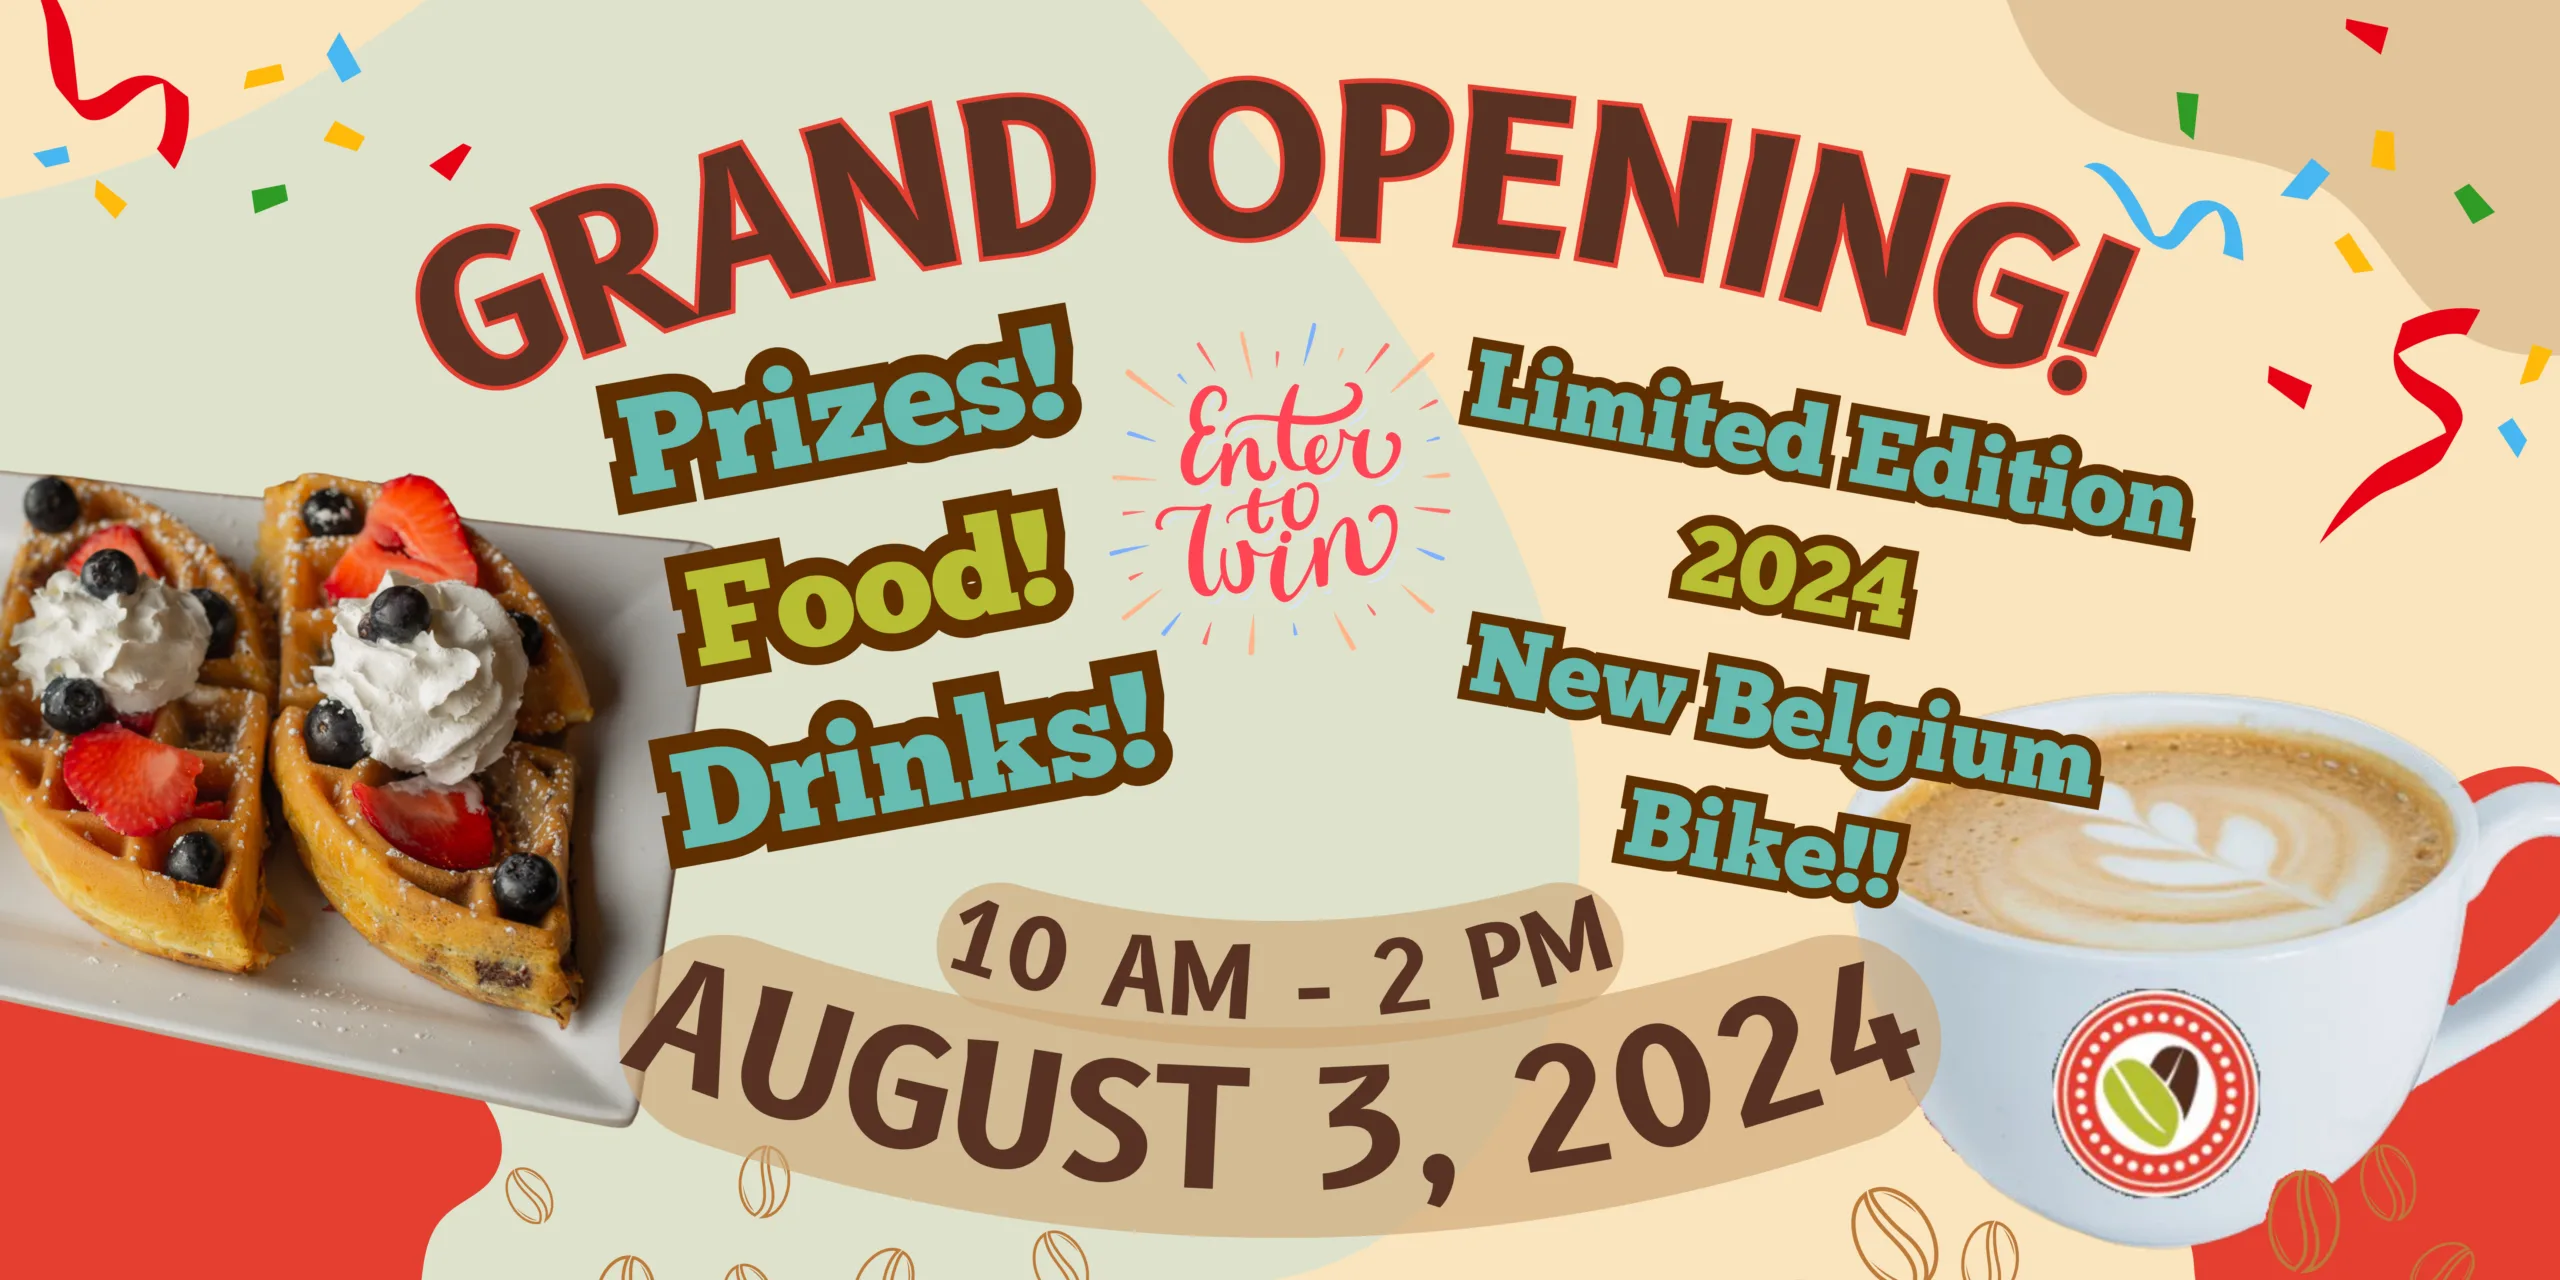 Just Love Coffee Cafe Grand Opening Banner